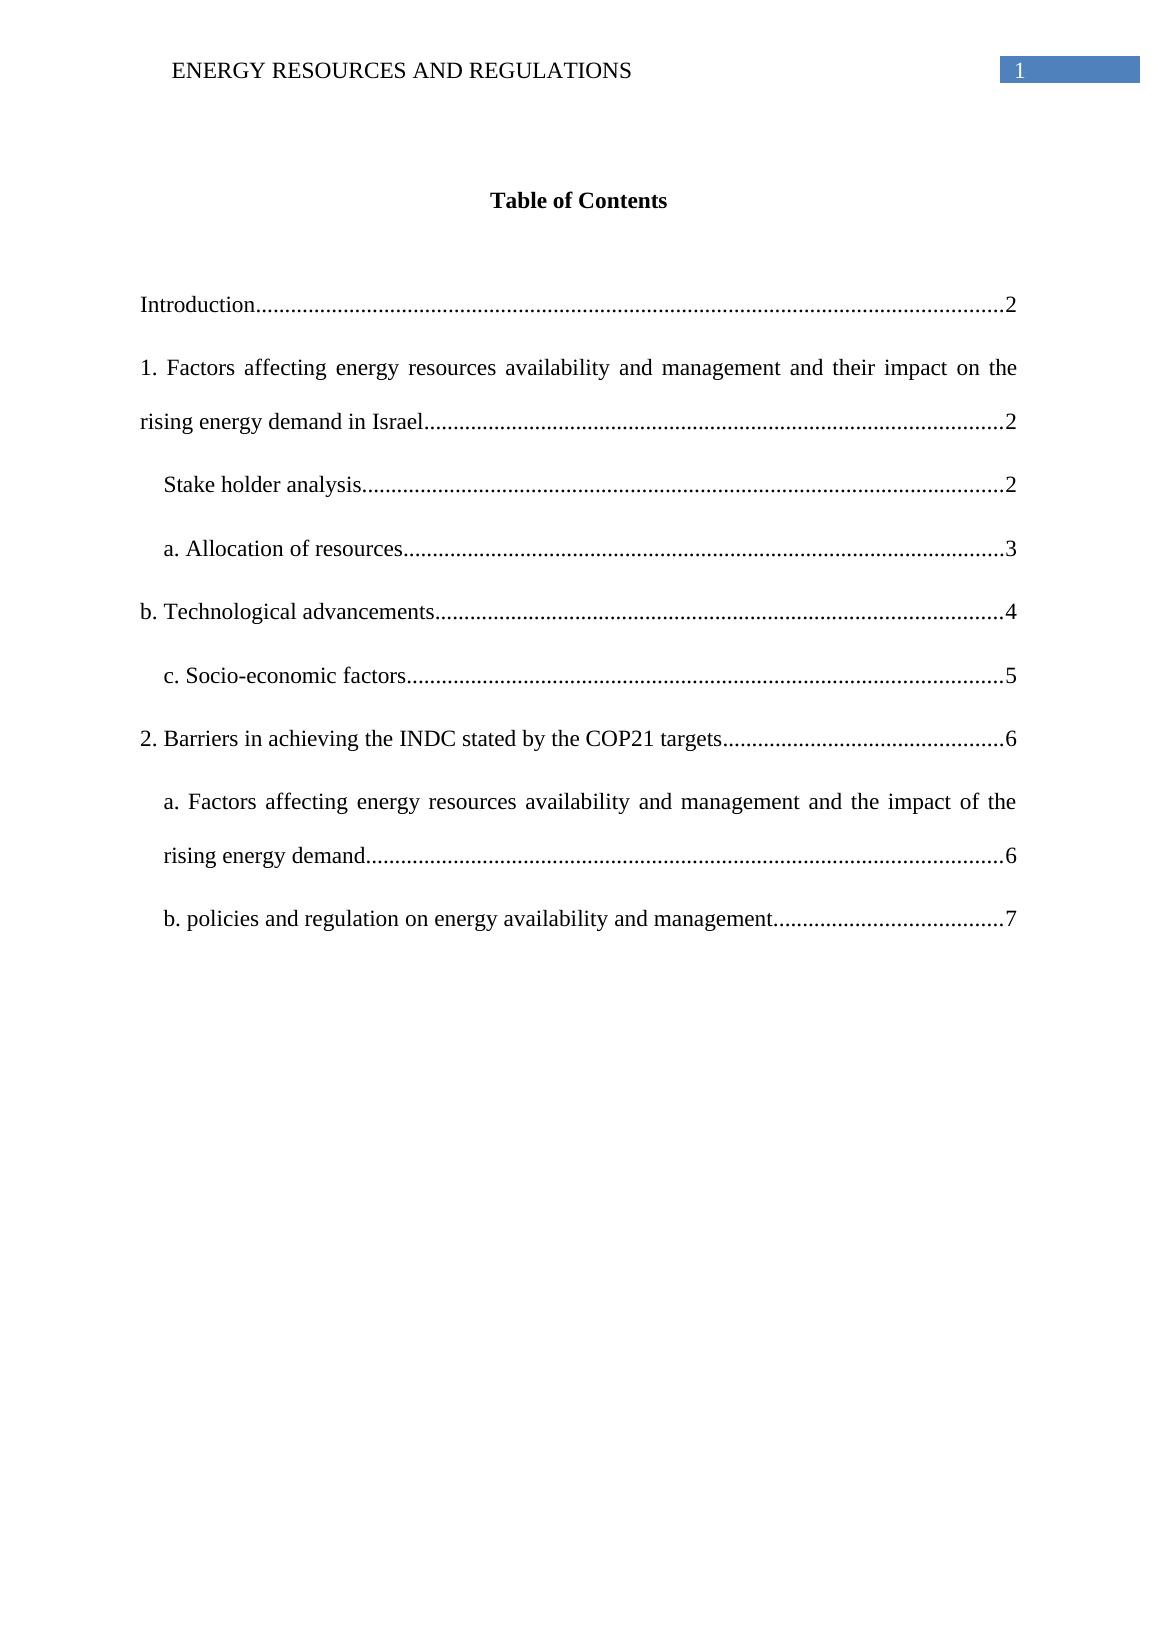 Energy Resources and Regulations - Assignment_2